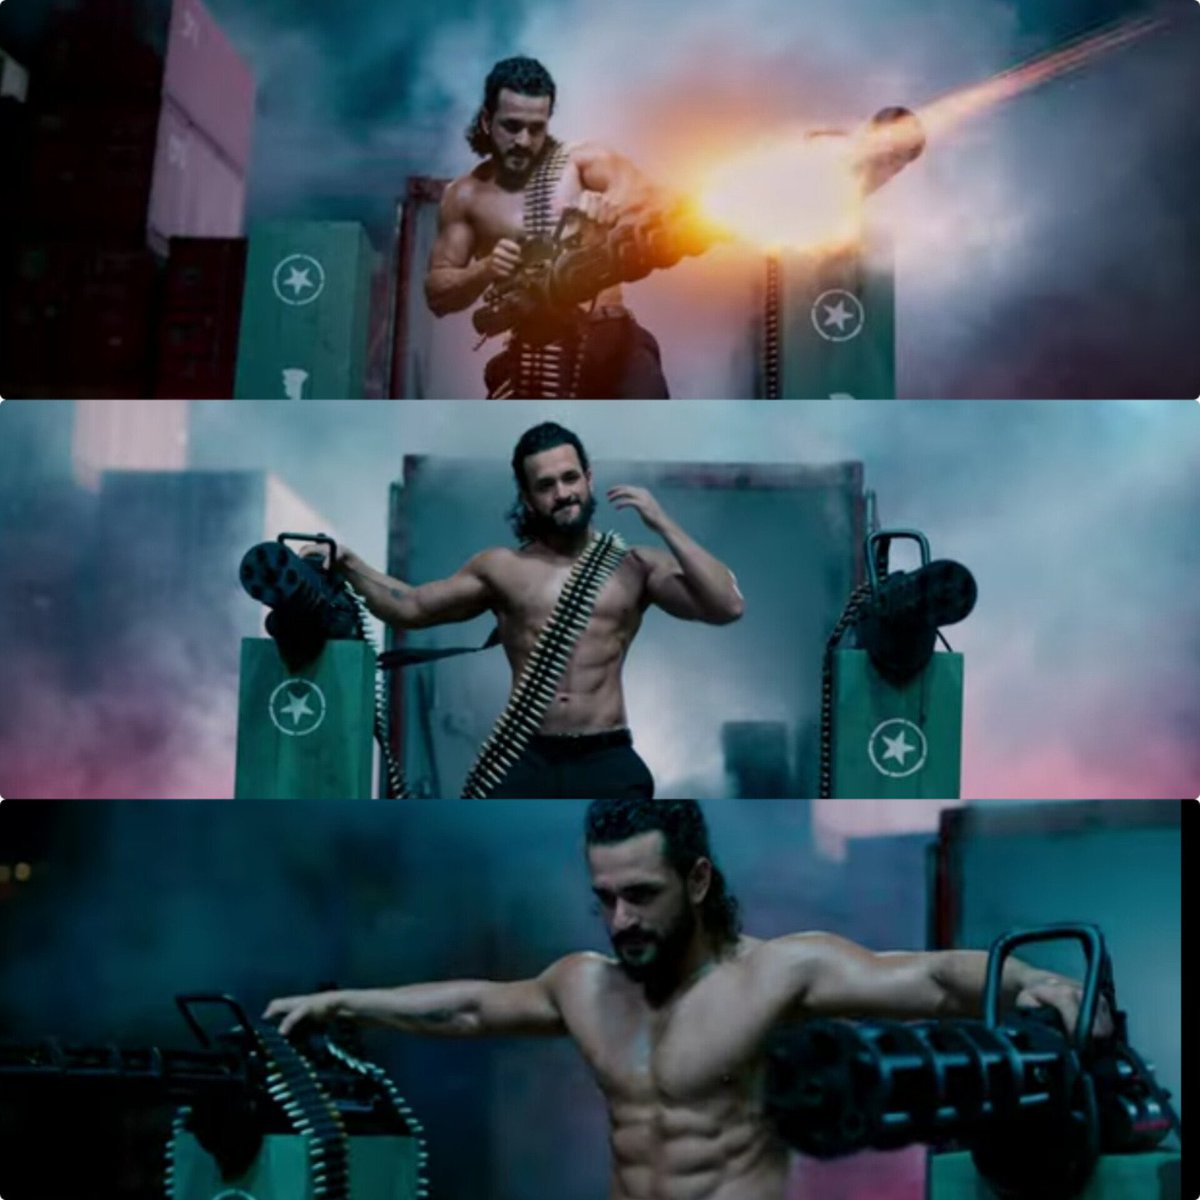 #AgentTrailer ACTION EXTRAVAGANZA 🔥🥵💥 DEFINITELY A WILD RIDE LOADING & #AkhilAkkineni 's FIRST 100 CR ALSO 💯🤩 #Mammotty THE LEGEND LOOKS STYLISH 😎 #SakshiVaidya BEST OF LUCK FOR YOUR DEBUT 🤩🔥😘 #AGENTonApril28th #Agent